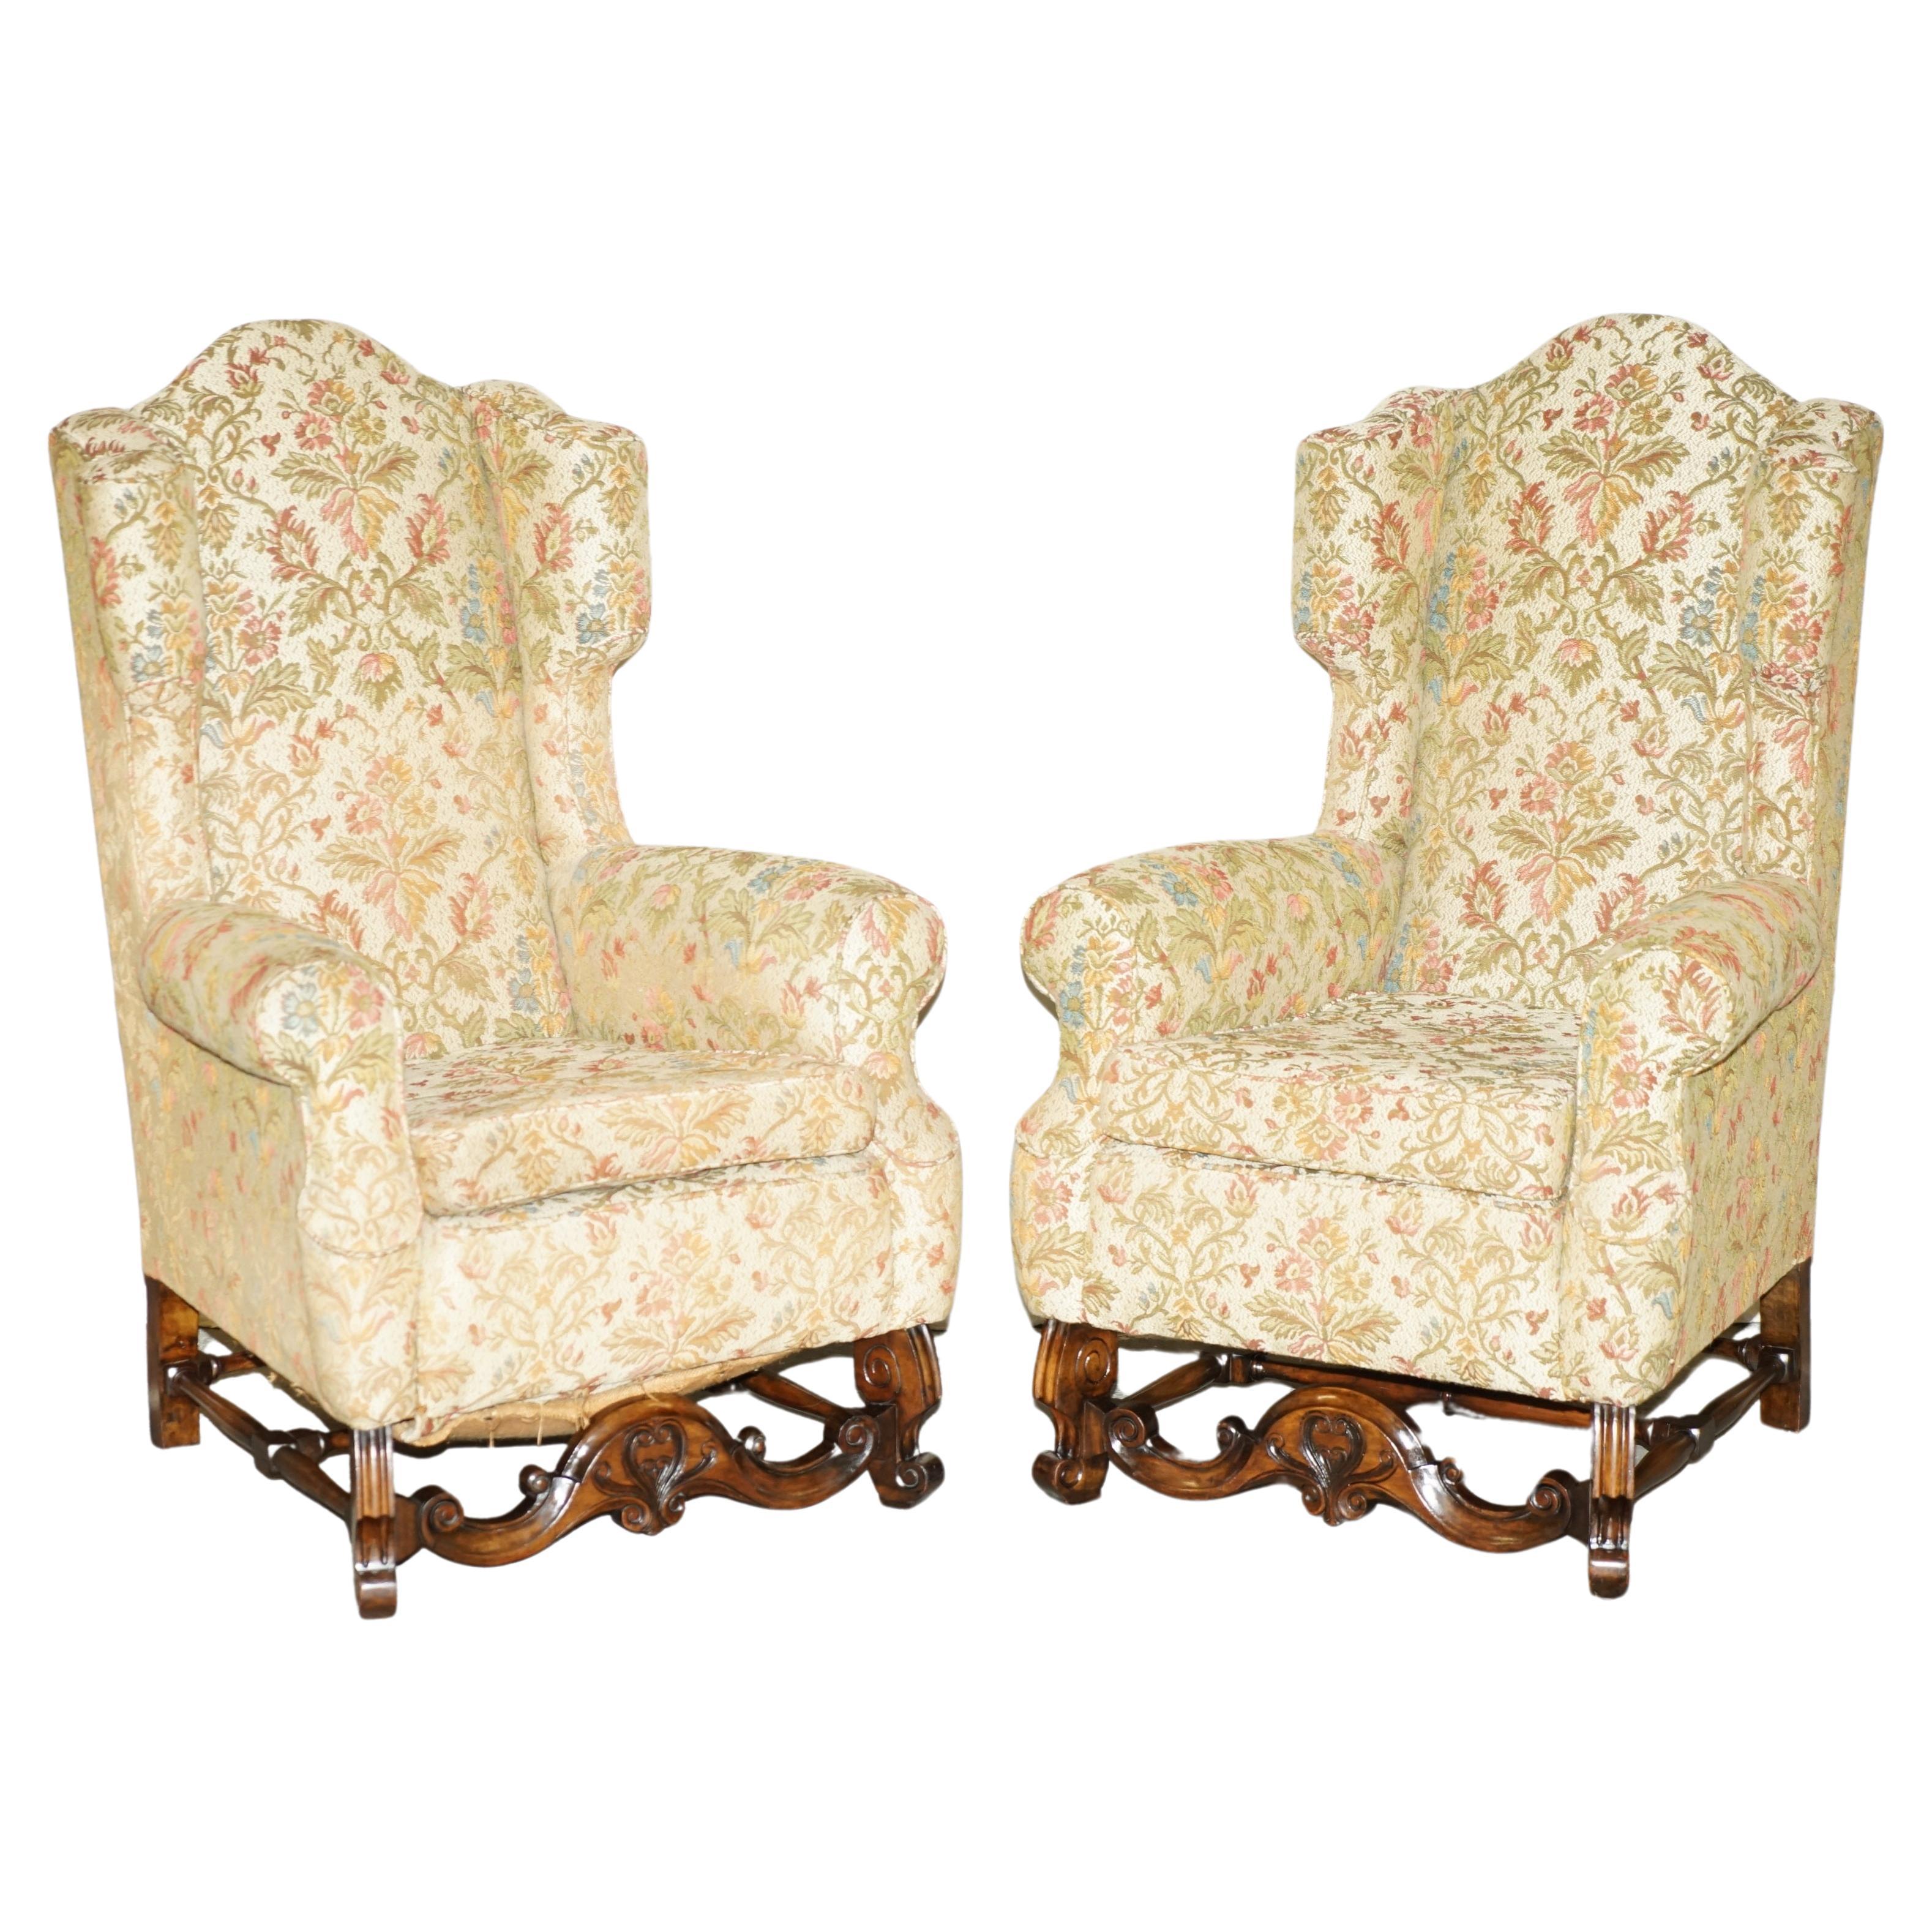 PAIR OF ANTIQUE ITALIAN CAROLEAN HIGH BACK WiNGBACK ARMCHAIRS FOR UPHOLSTERY For Sale